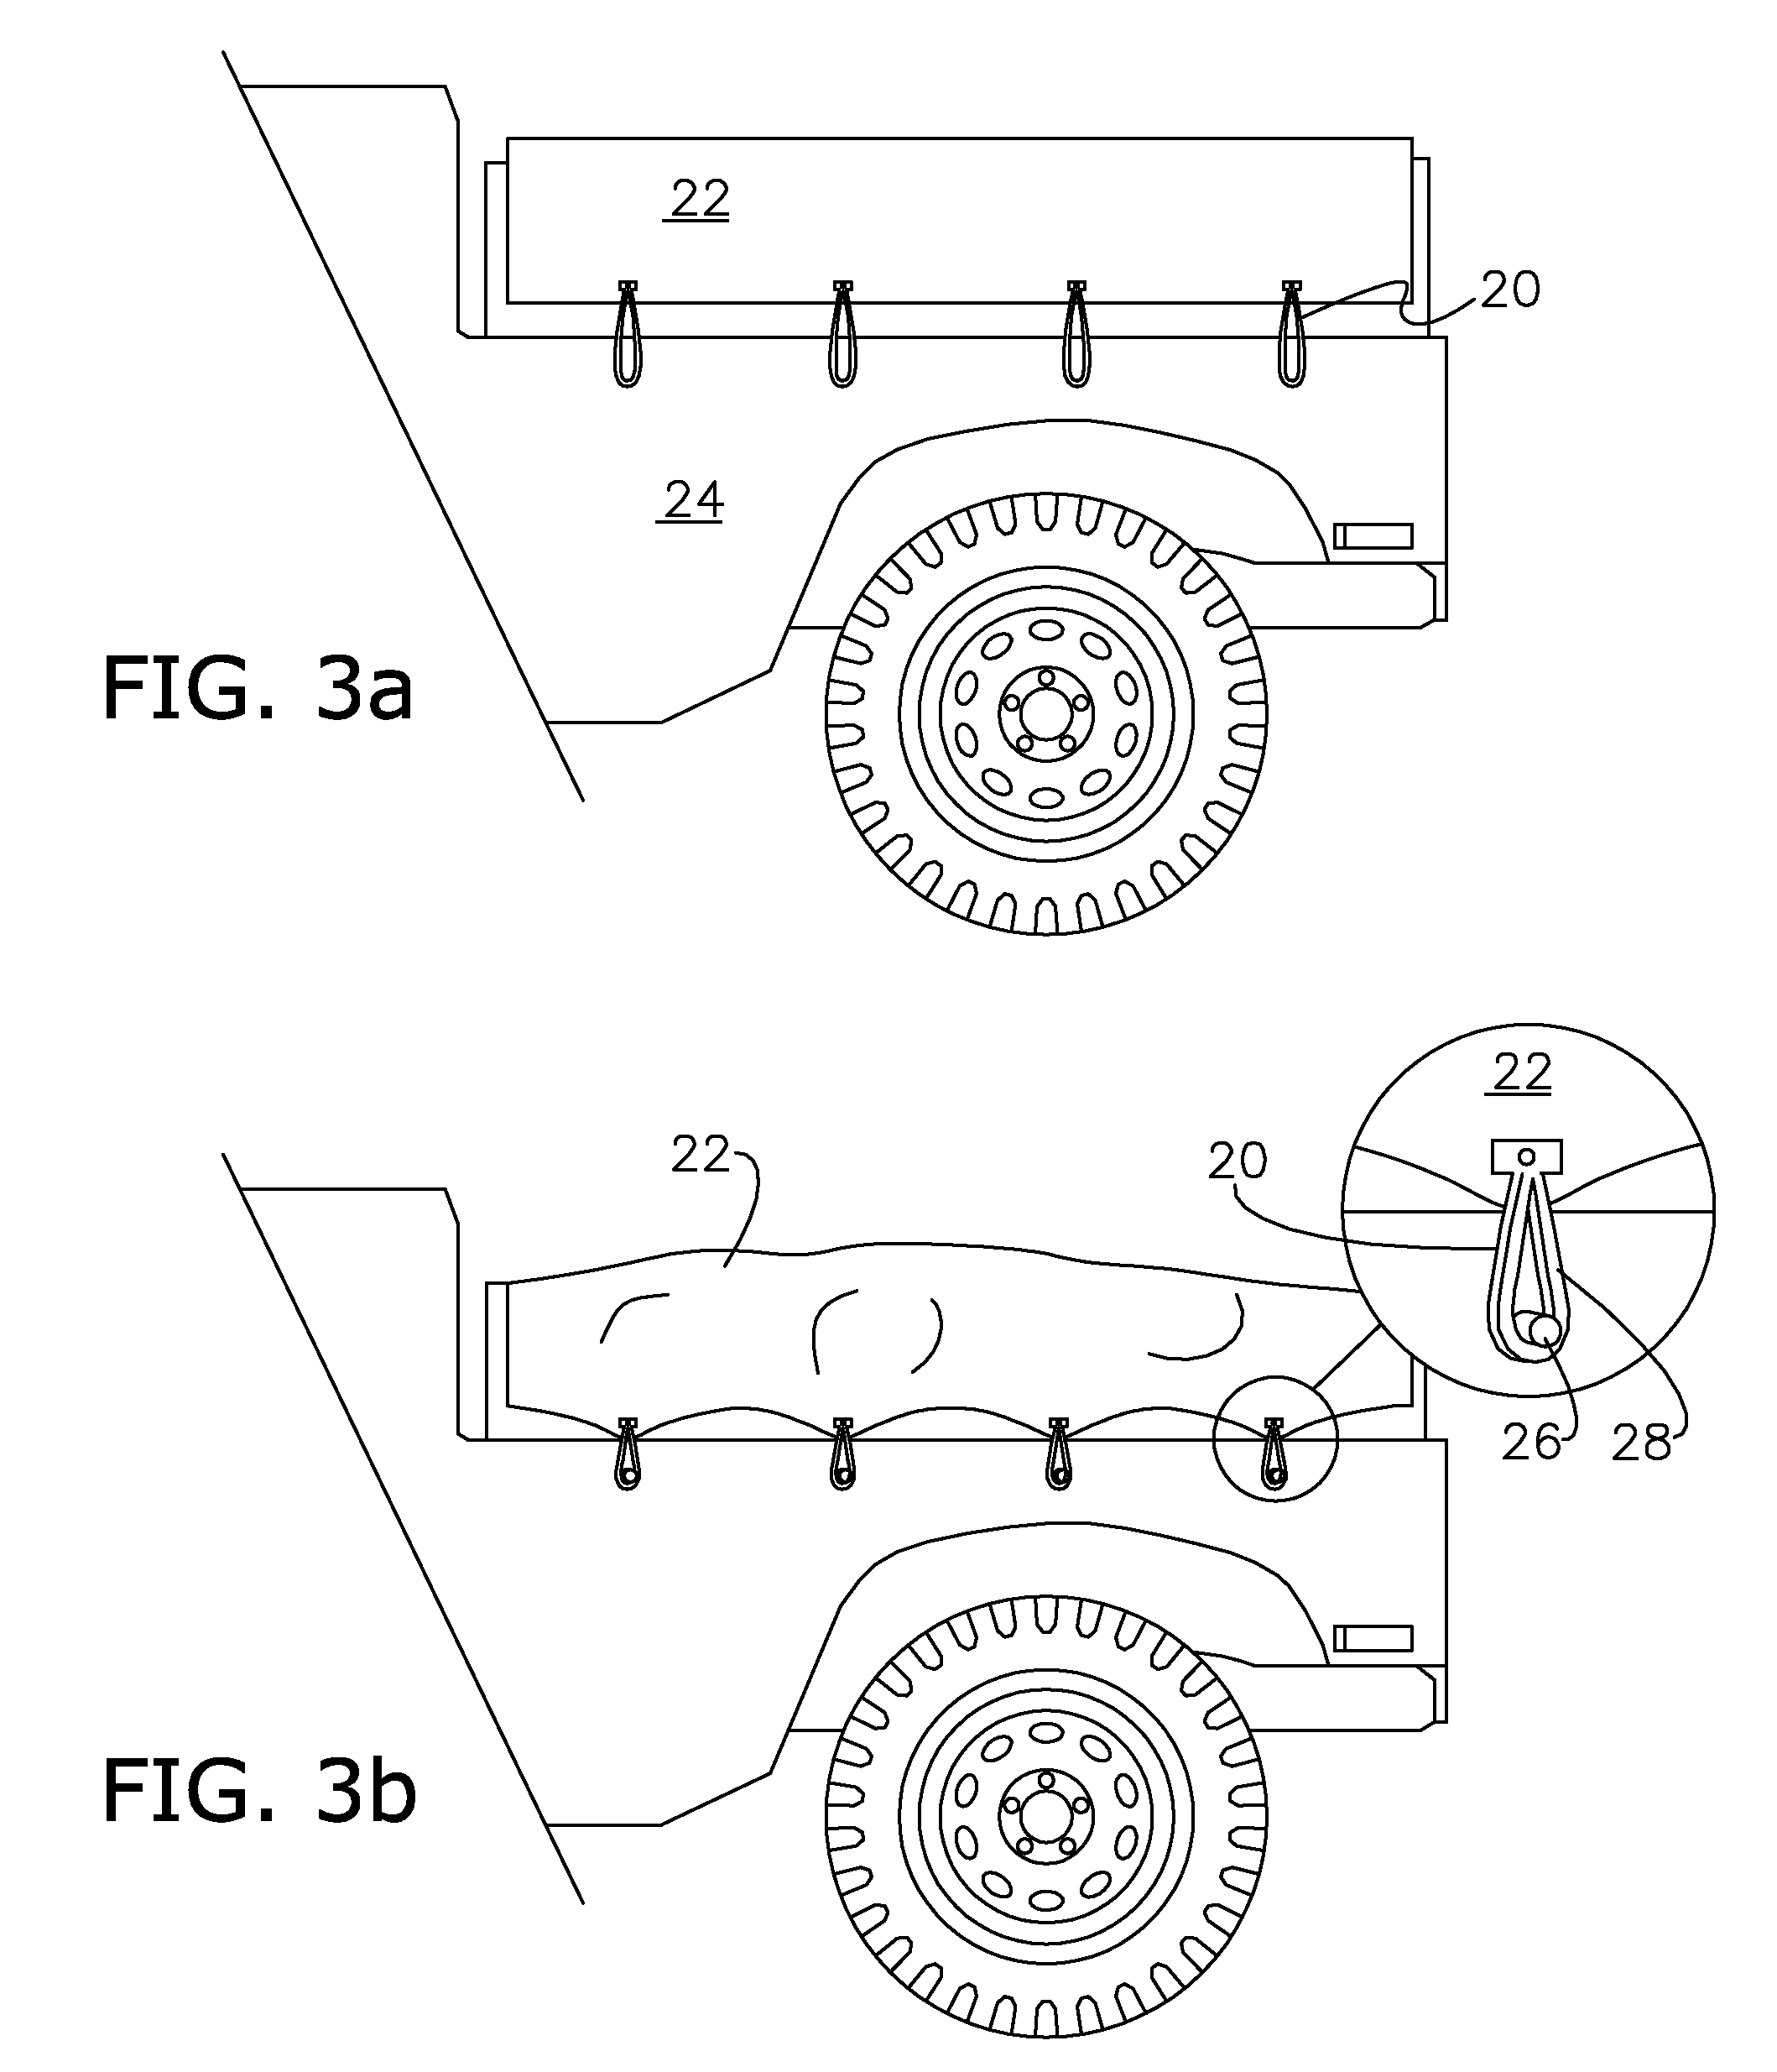 Conformable layer utilizing active material actuation